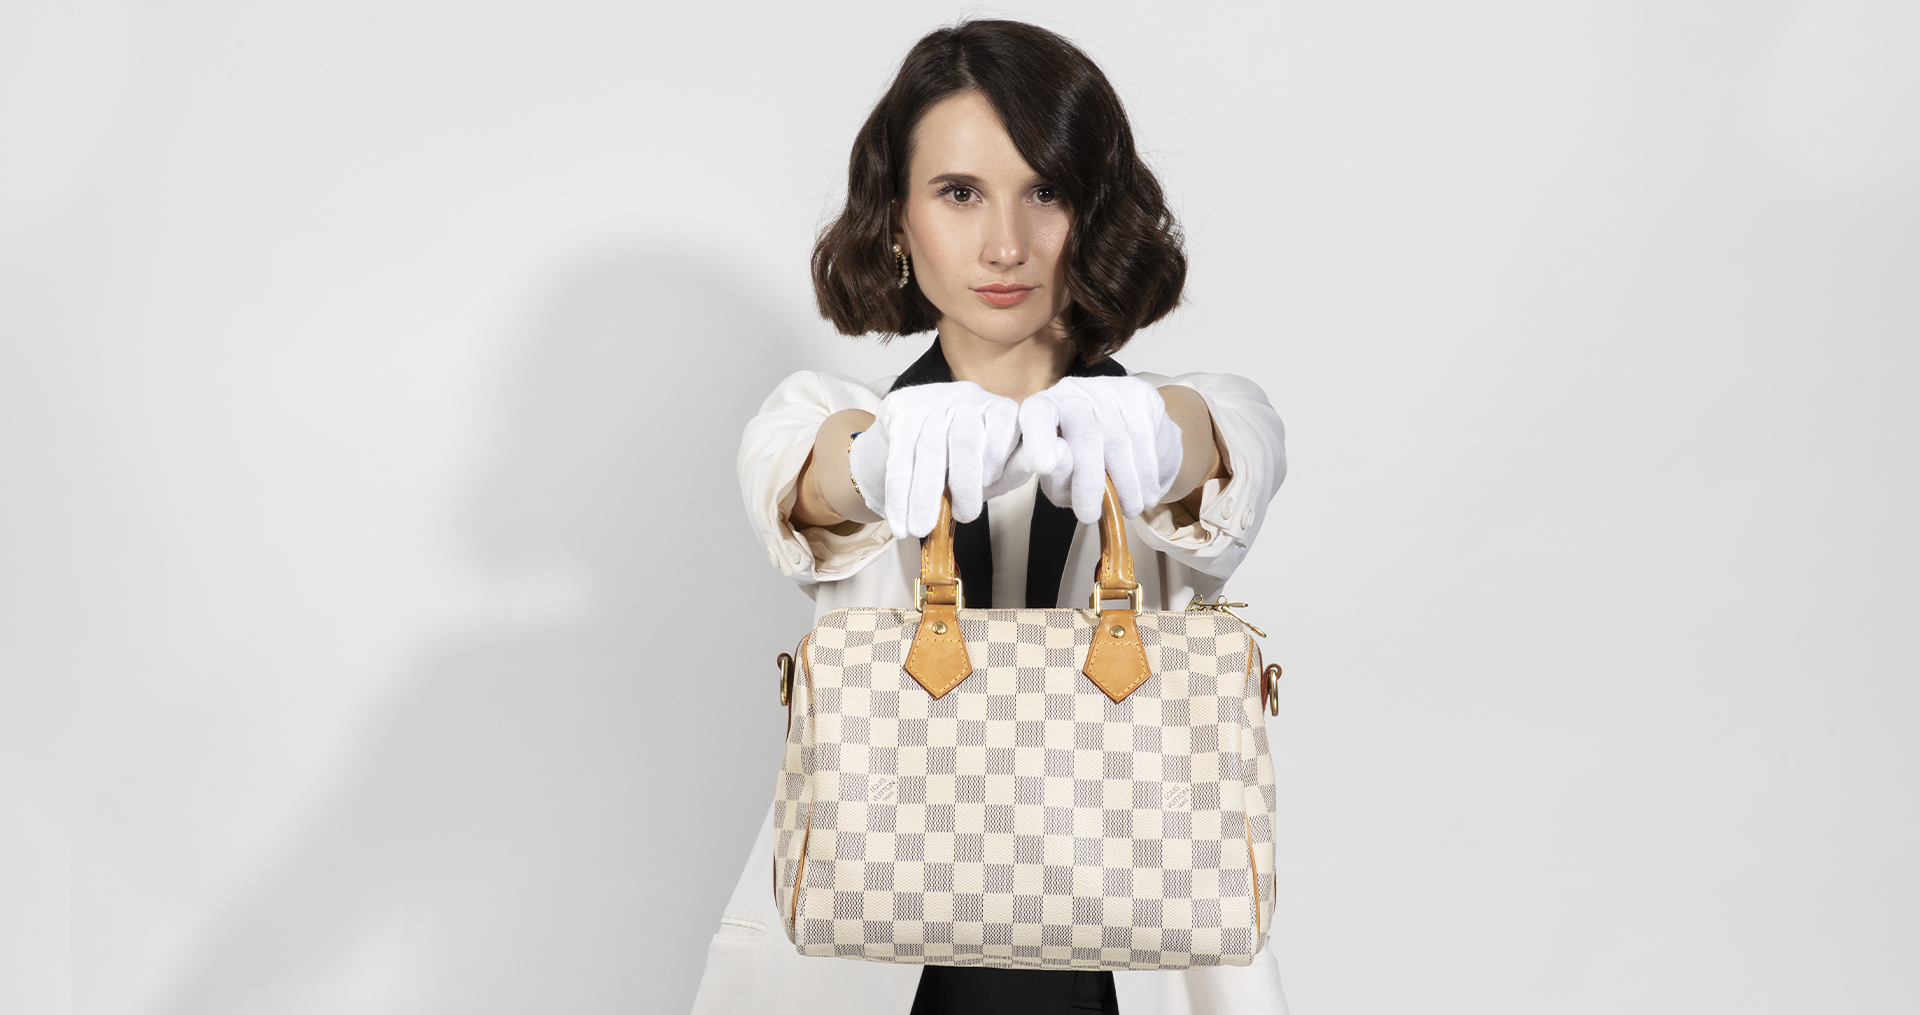 How To Sell Your Louis Vuitton Speedy - The Vault